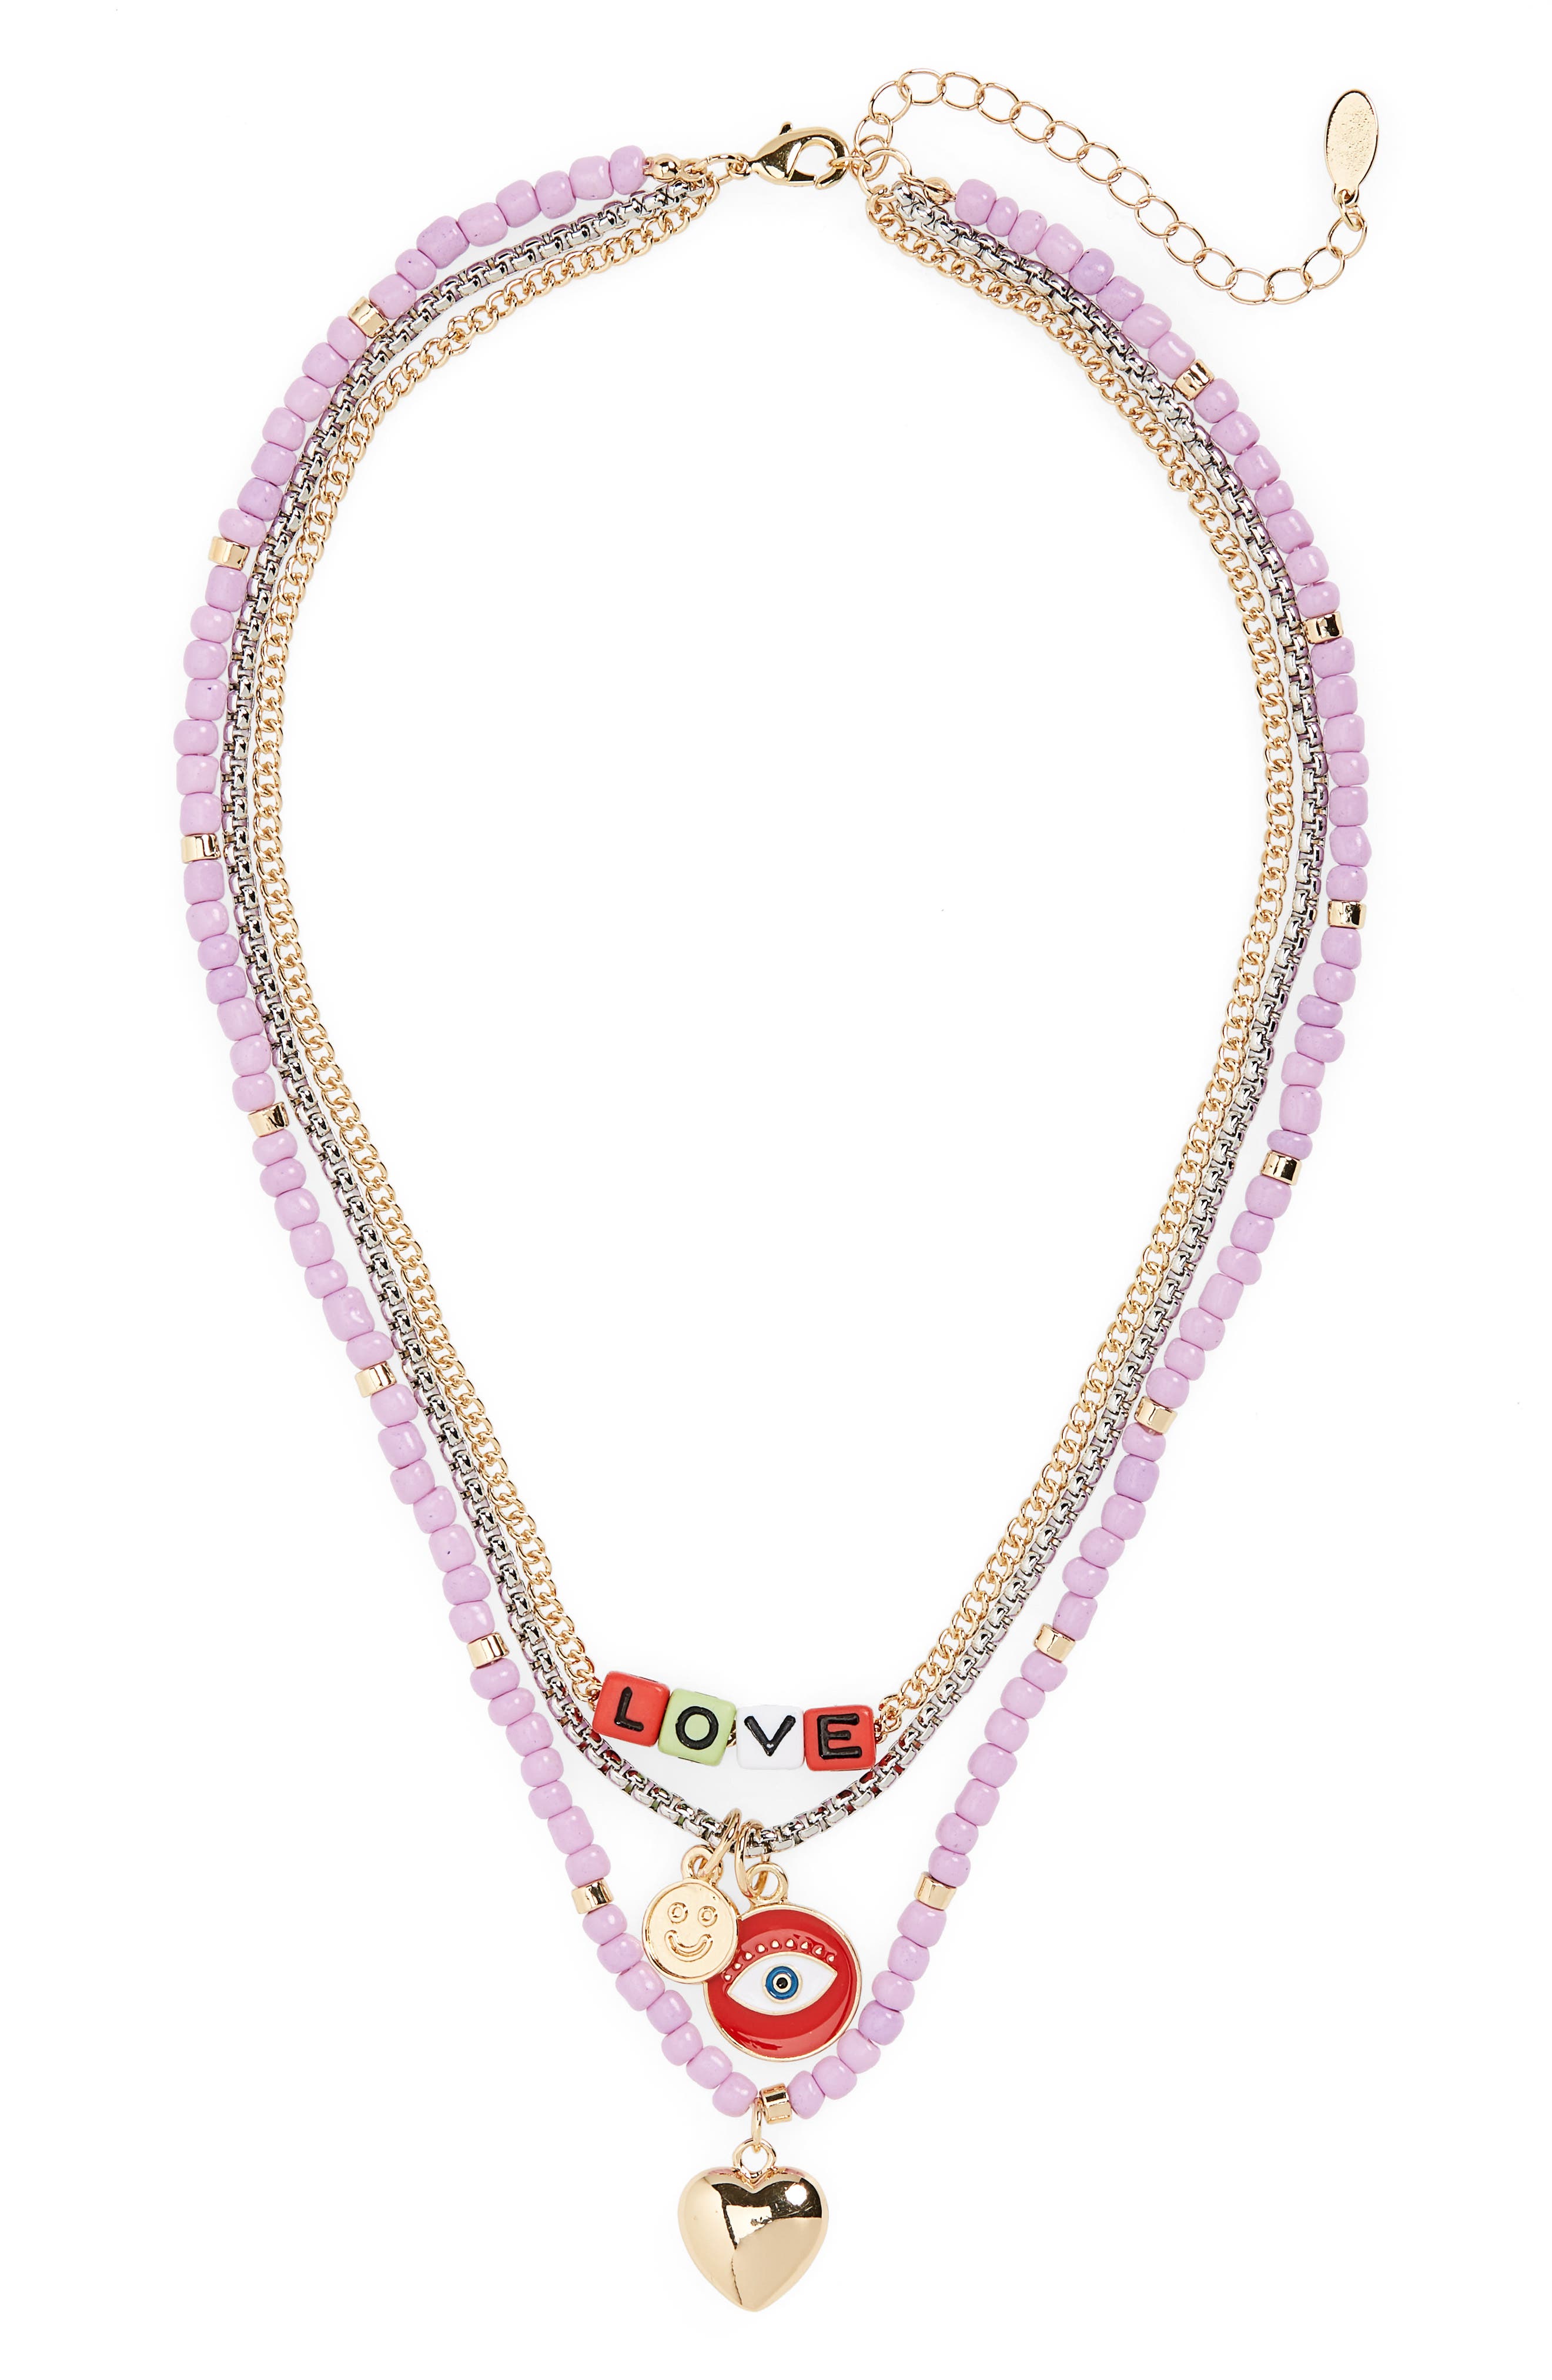 Necklace 'french touch' 'Liberty' pink purple. 